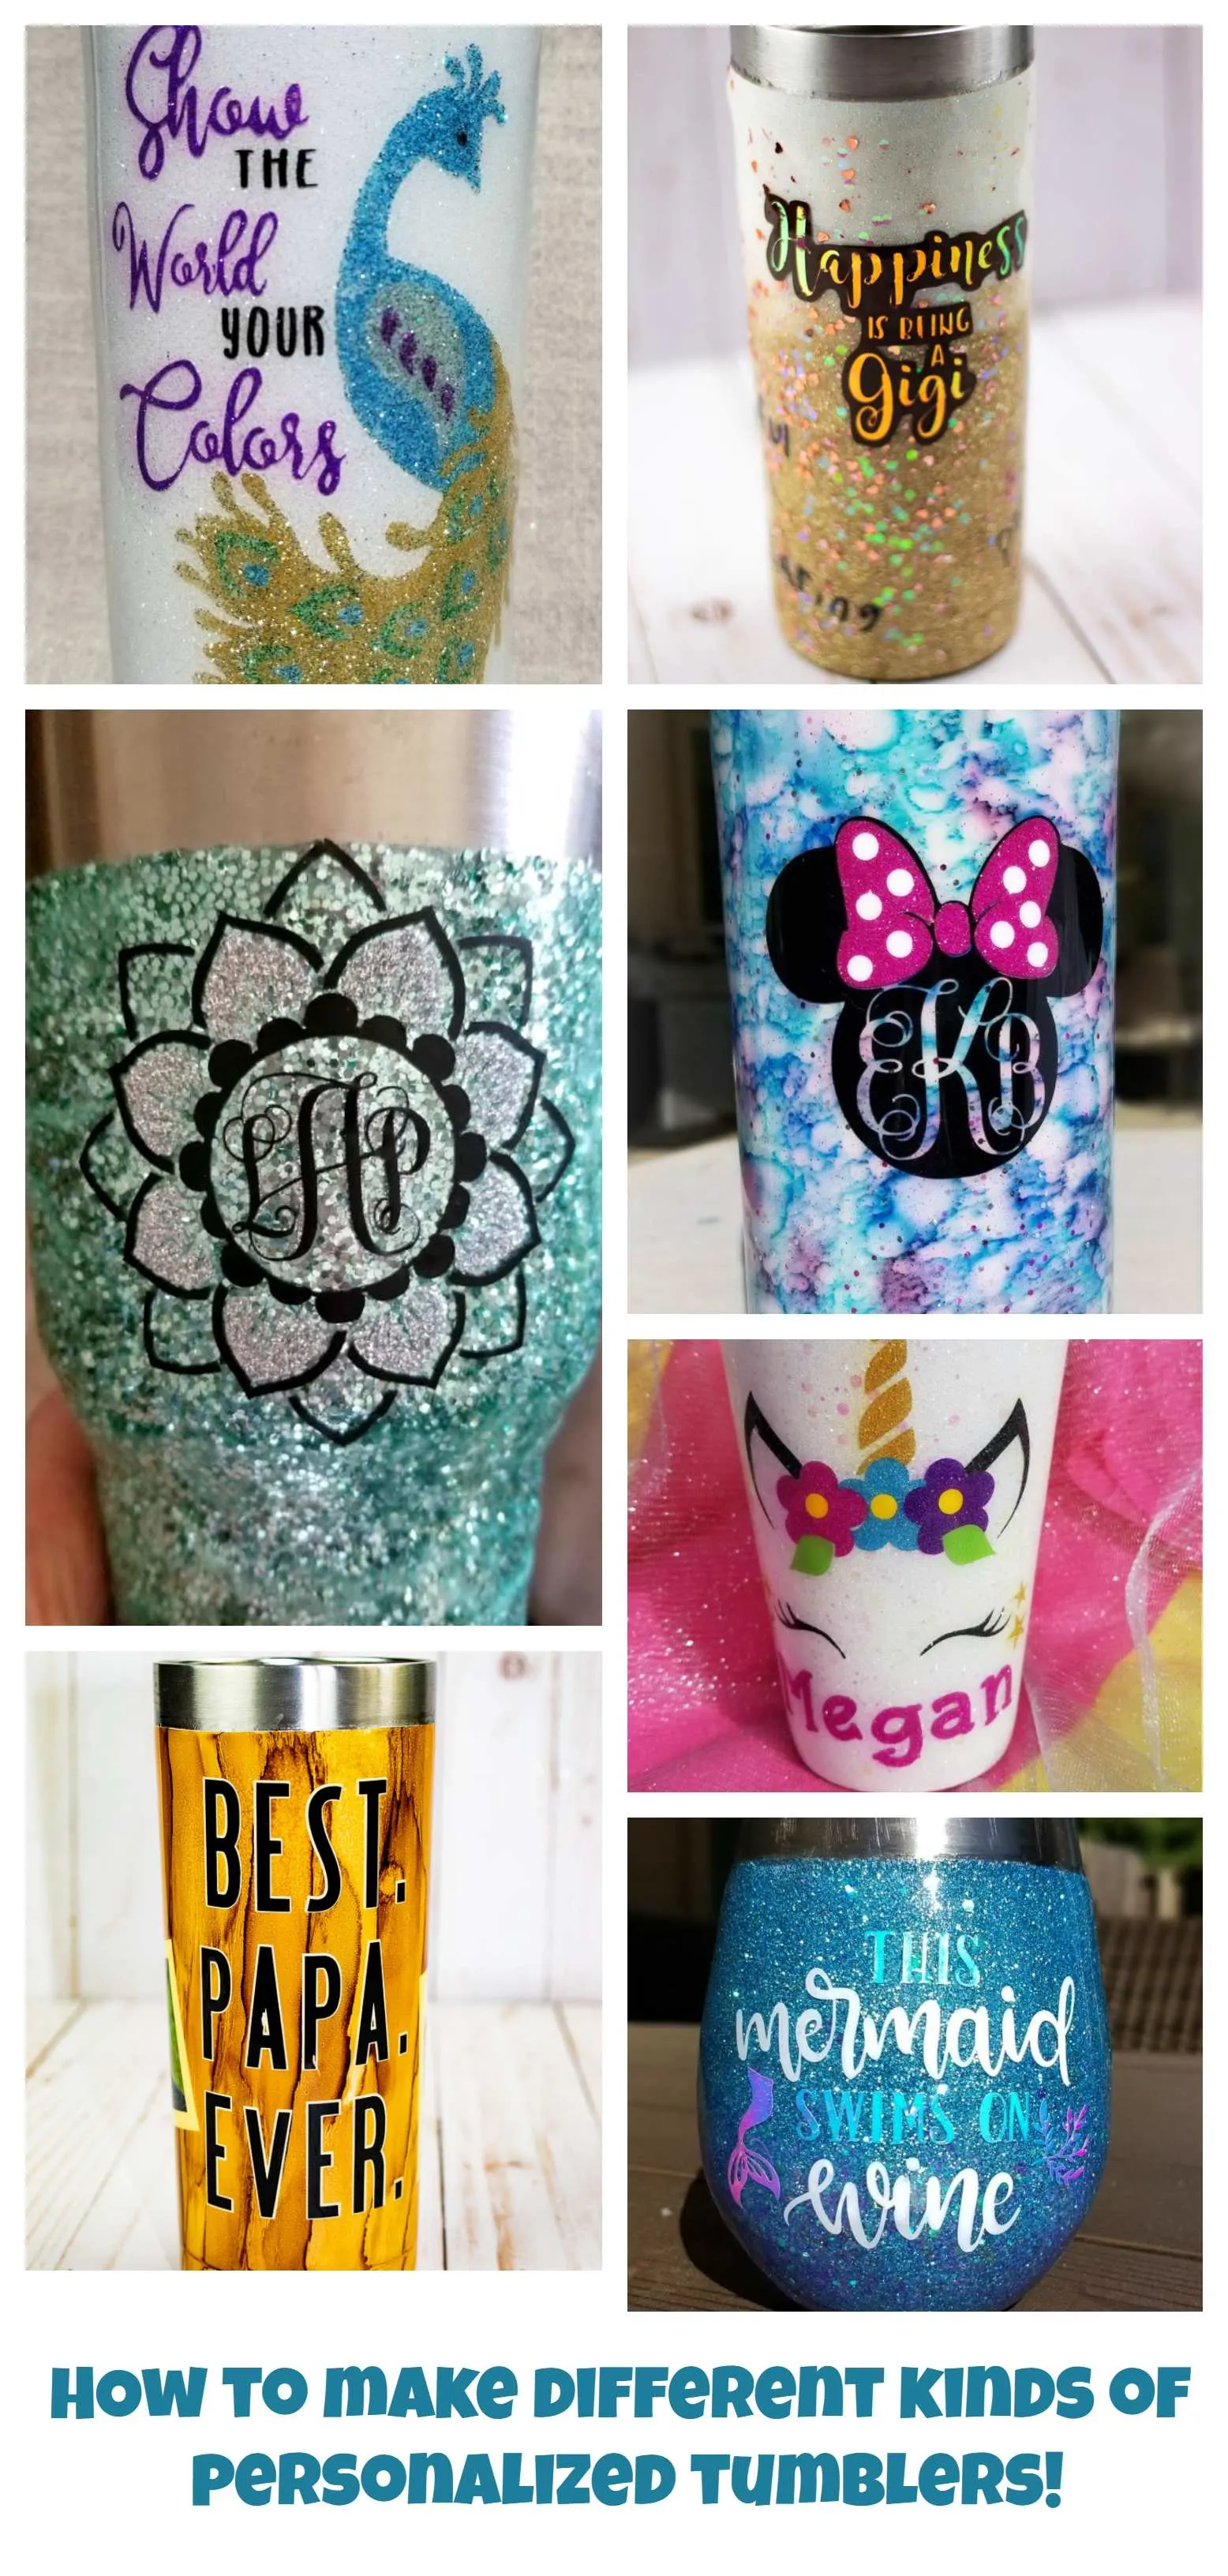 DIY Halloween Cold Cups Cricut Tutorial - Crafting a Lovely Life